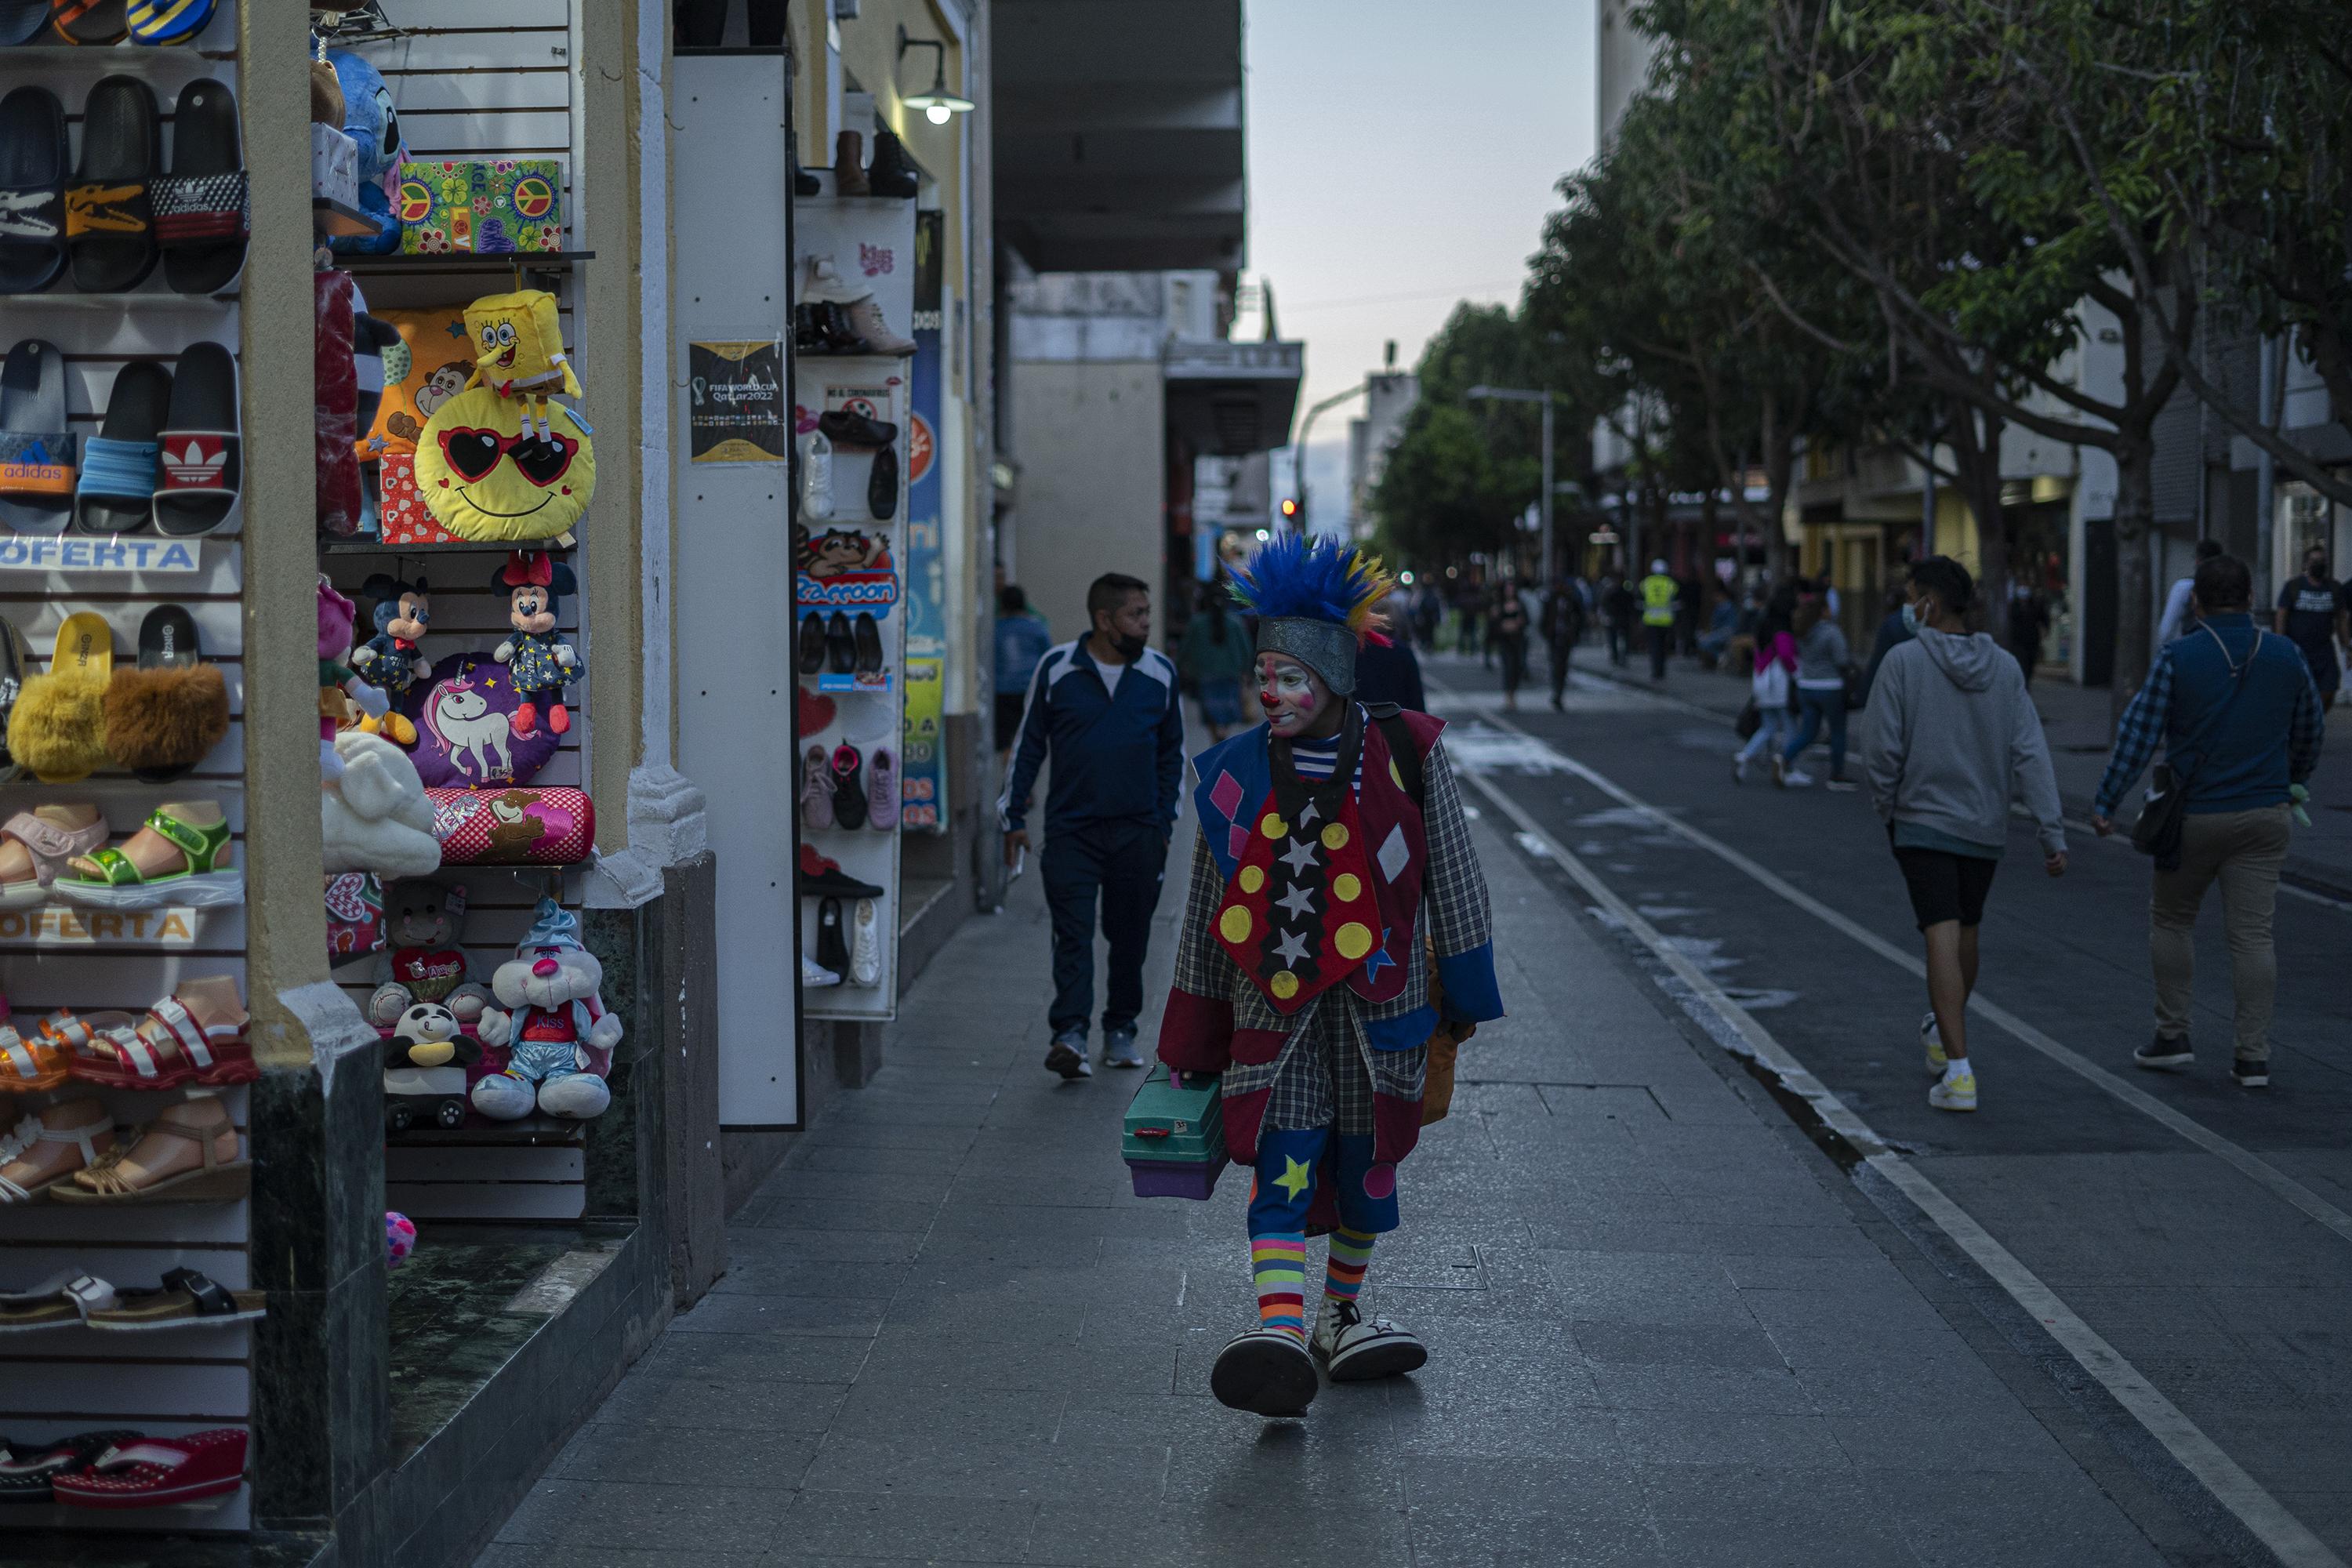 The Sexta is a corridor of survival for stranded migrants. Zancudito, a clown born in El Salvador, has spent 20 years walking and living on this pedestrian walkway. He makes around 150 quetzales, or 19 dollars, a day. Photo: Víctor Peña/El Faro